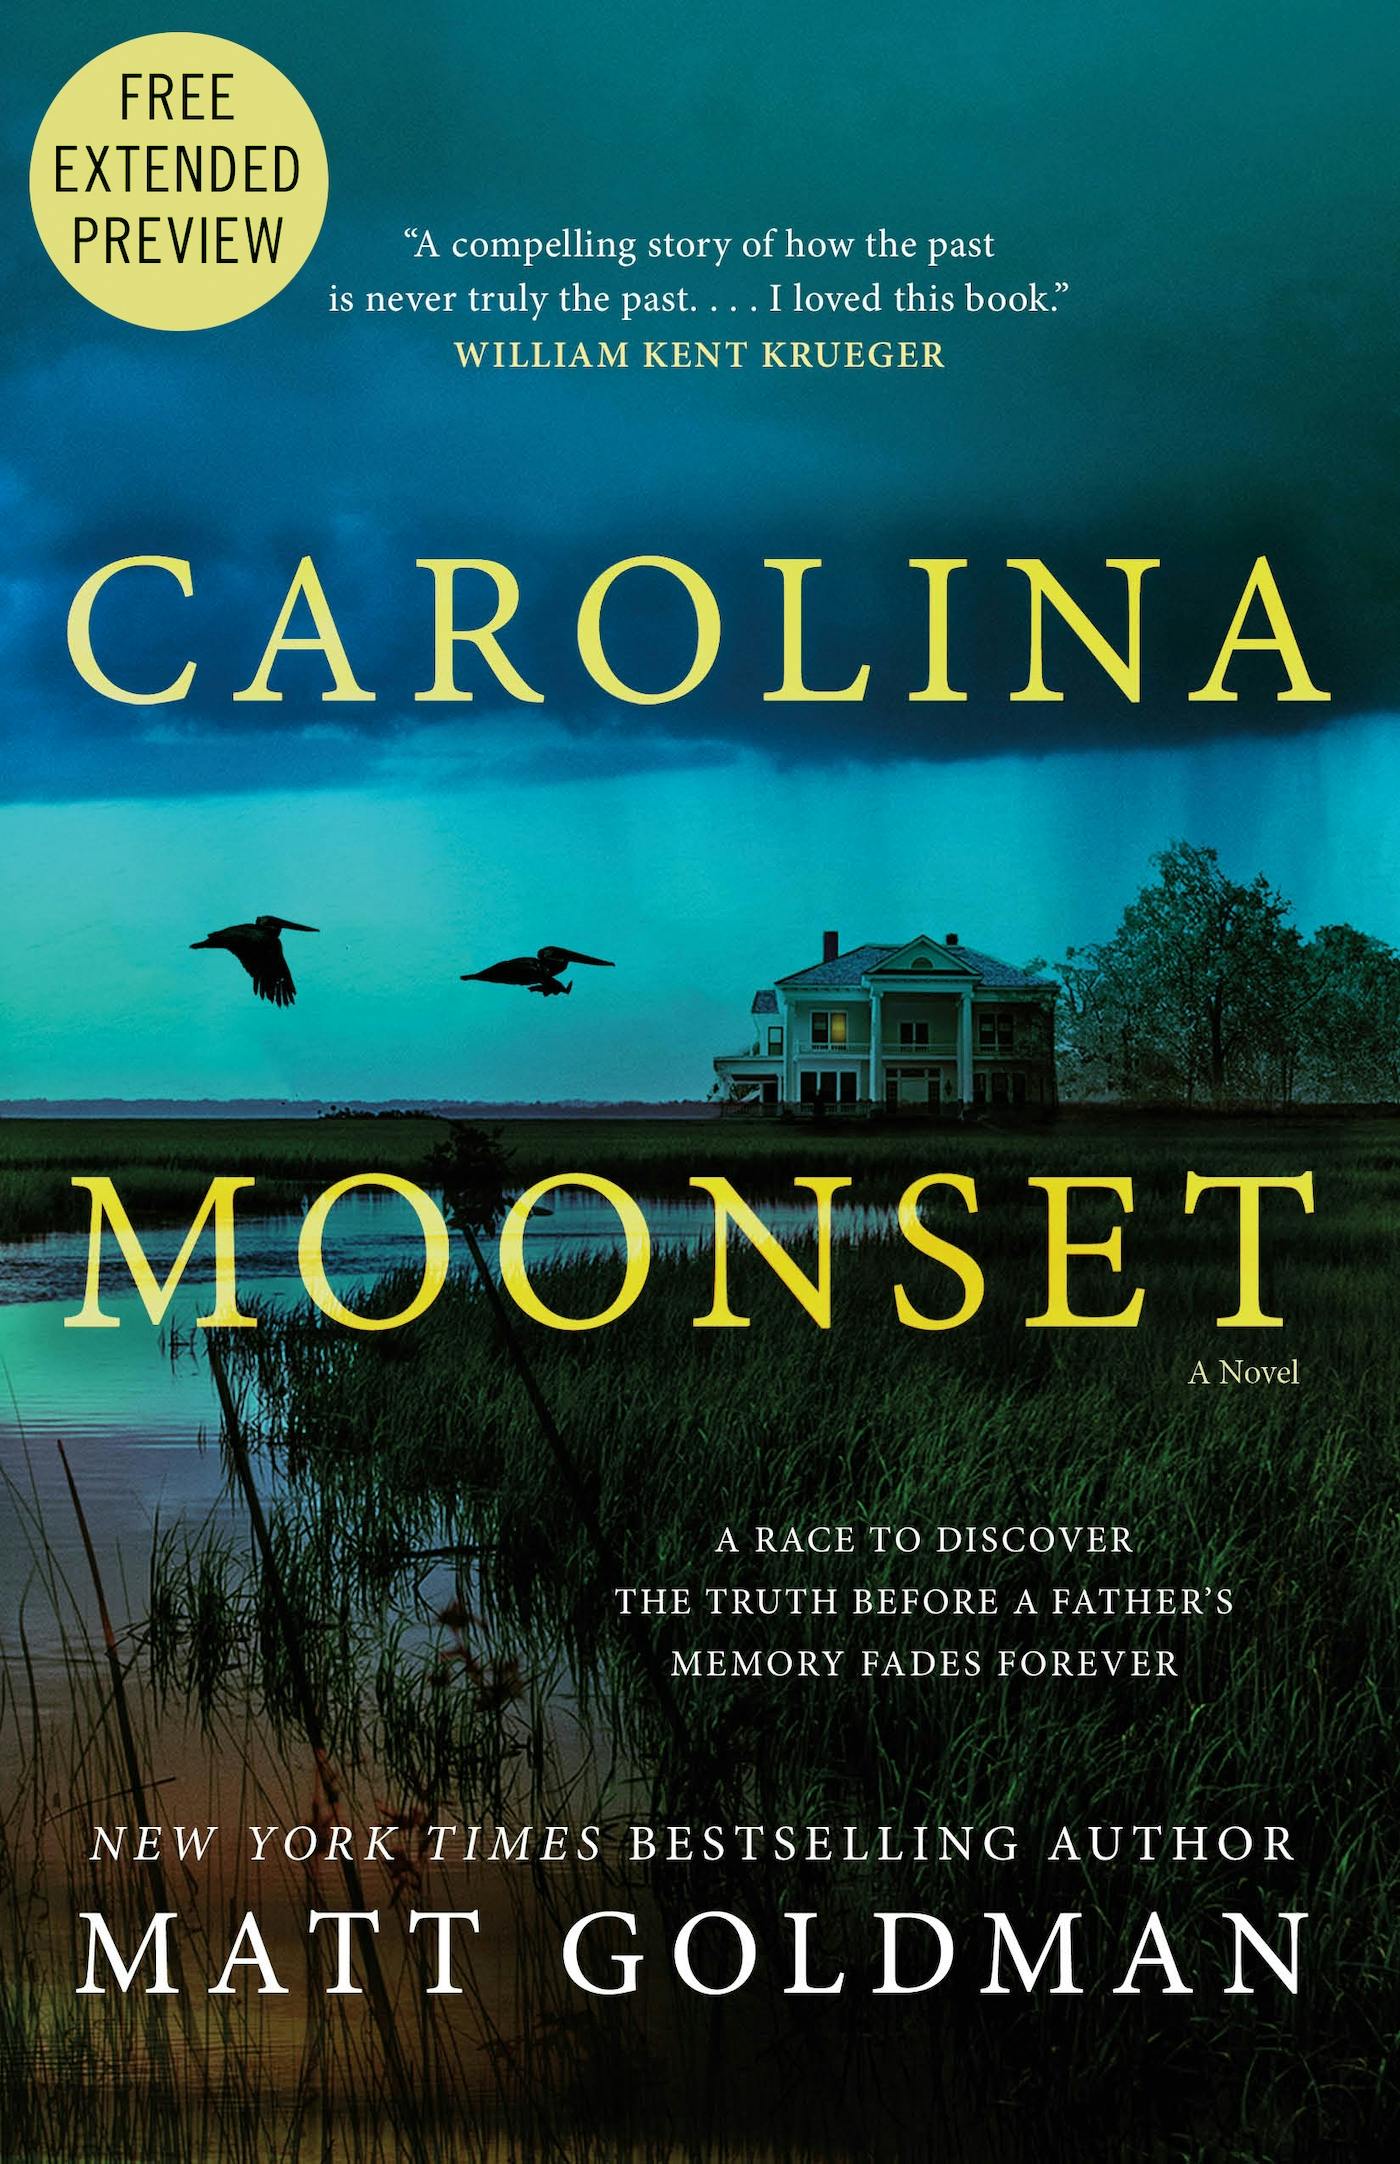 Cover for the book titled as: Carolina Moonset Sneak Peek